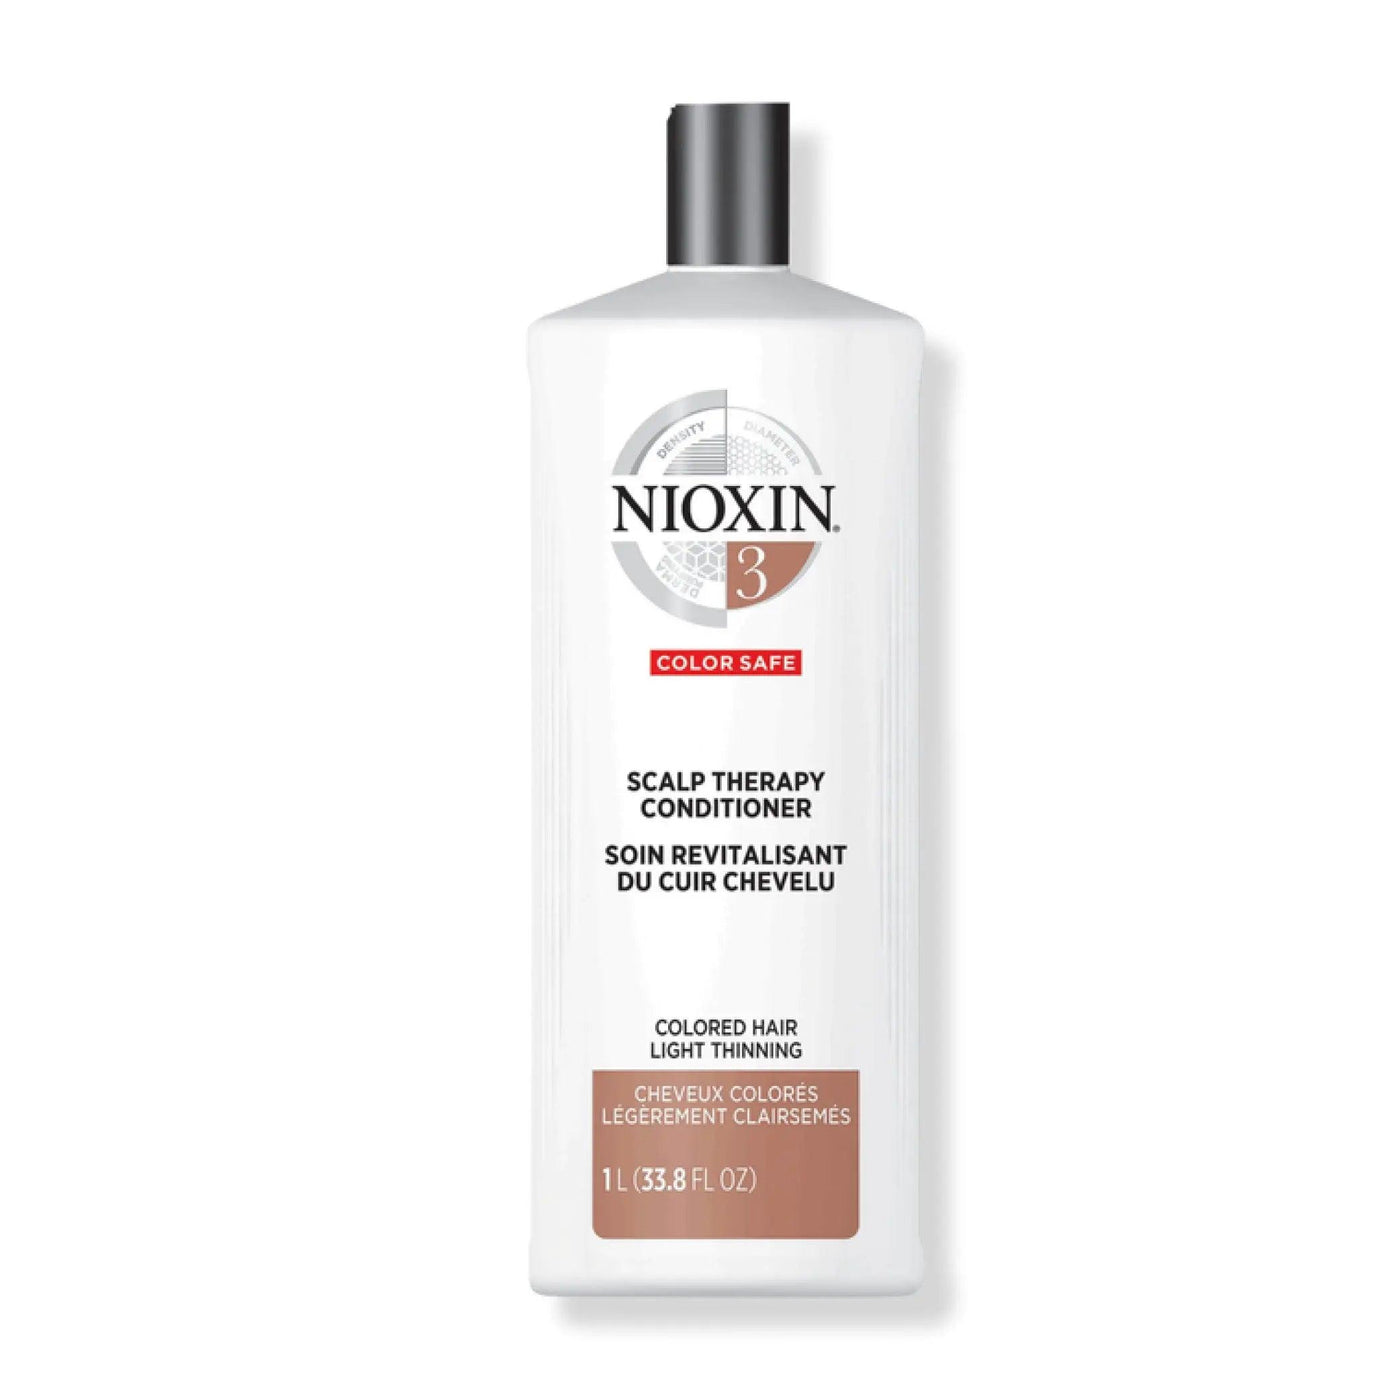 System 3 Scalp Therapy Conditioner Nioxin Boutique Deauville